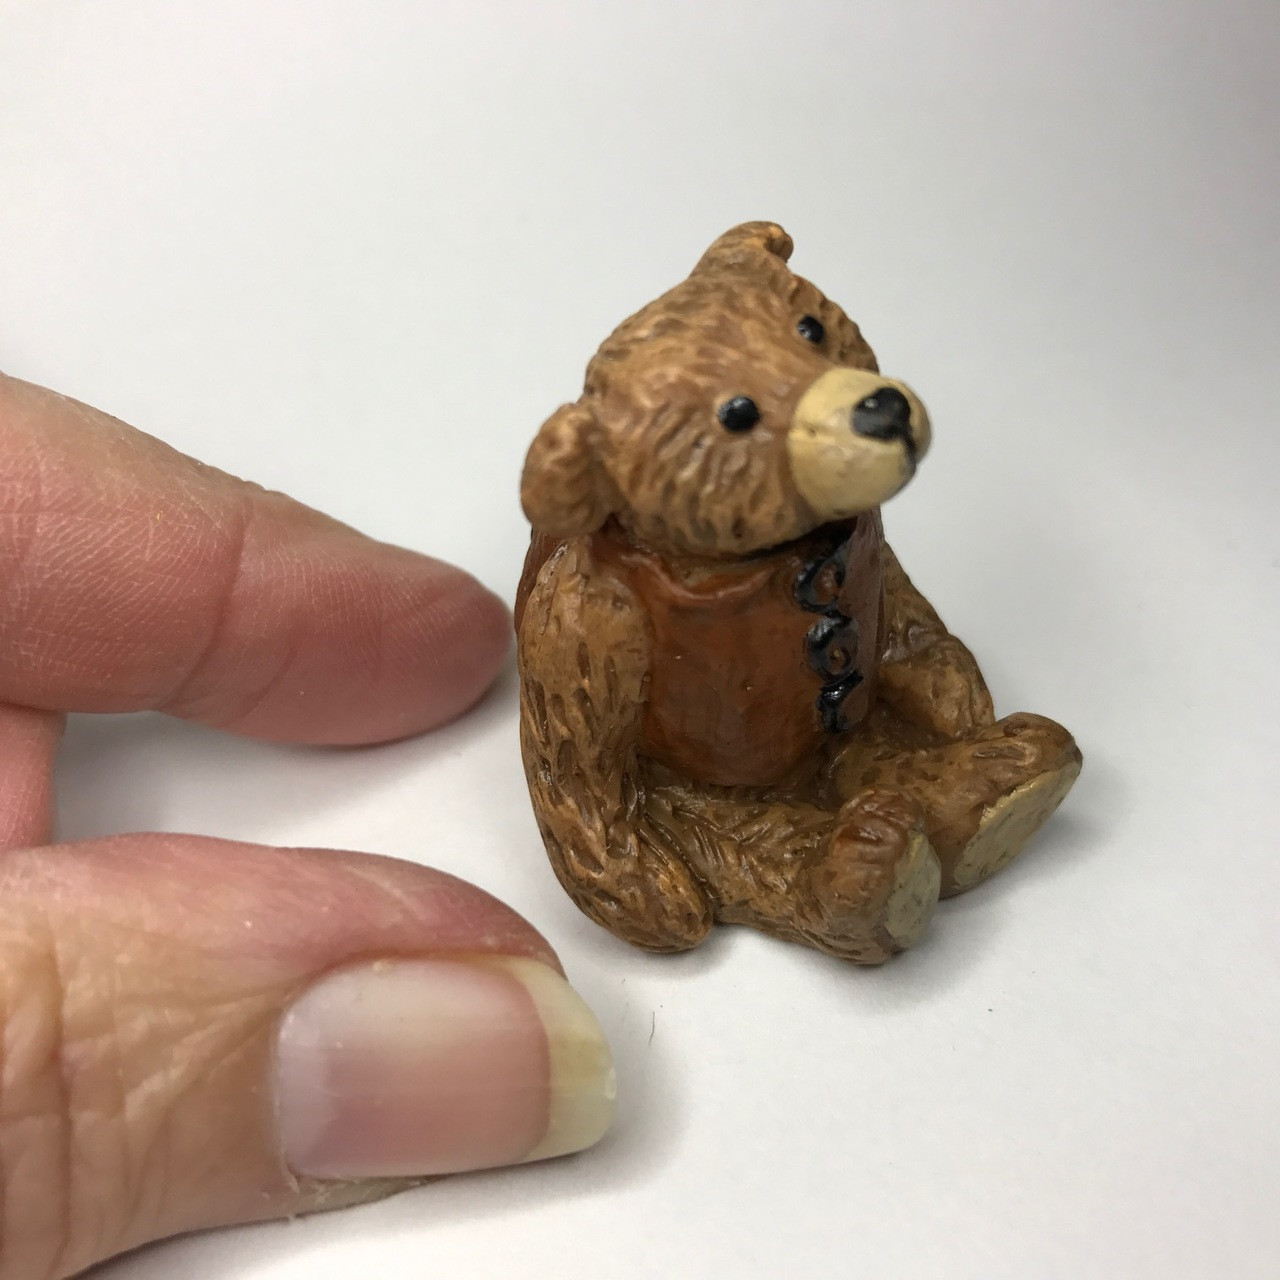 Itty bitty brown bear wearing a light brown "leather" vest